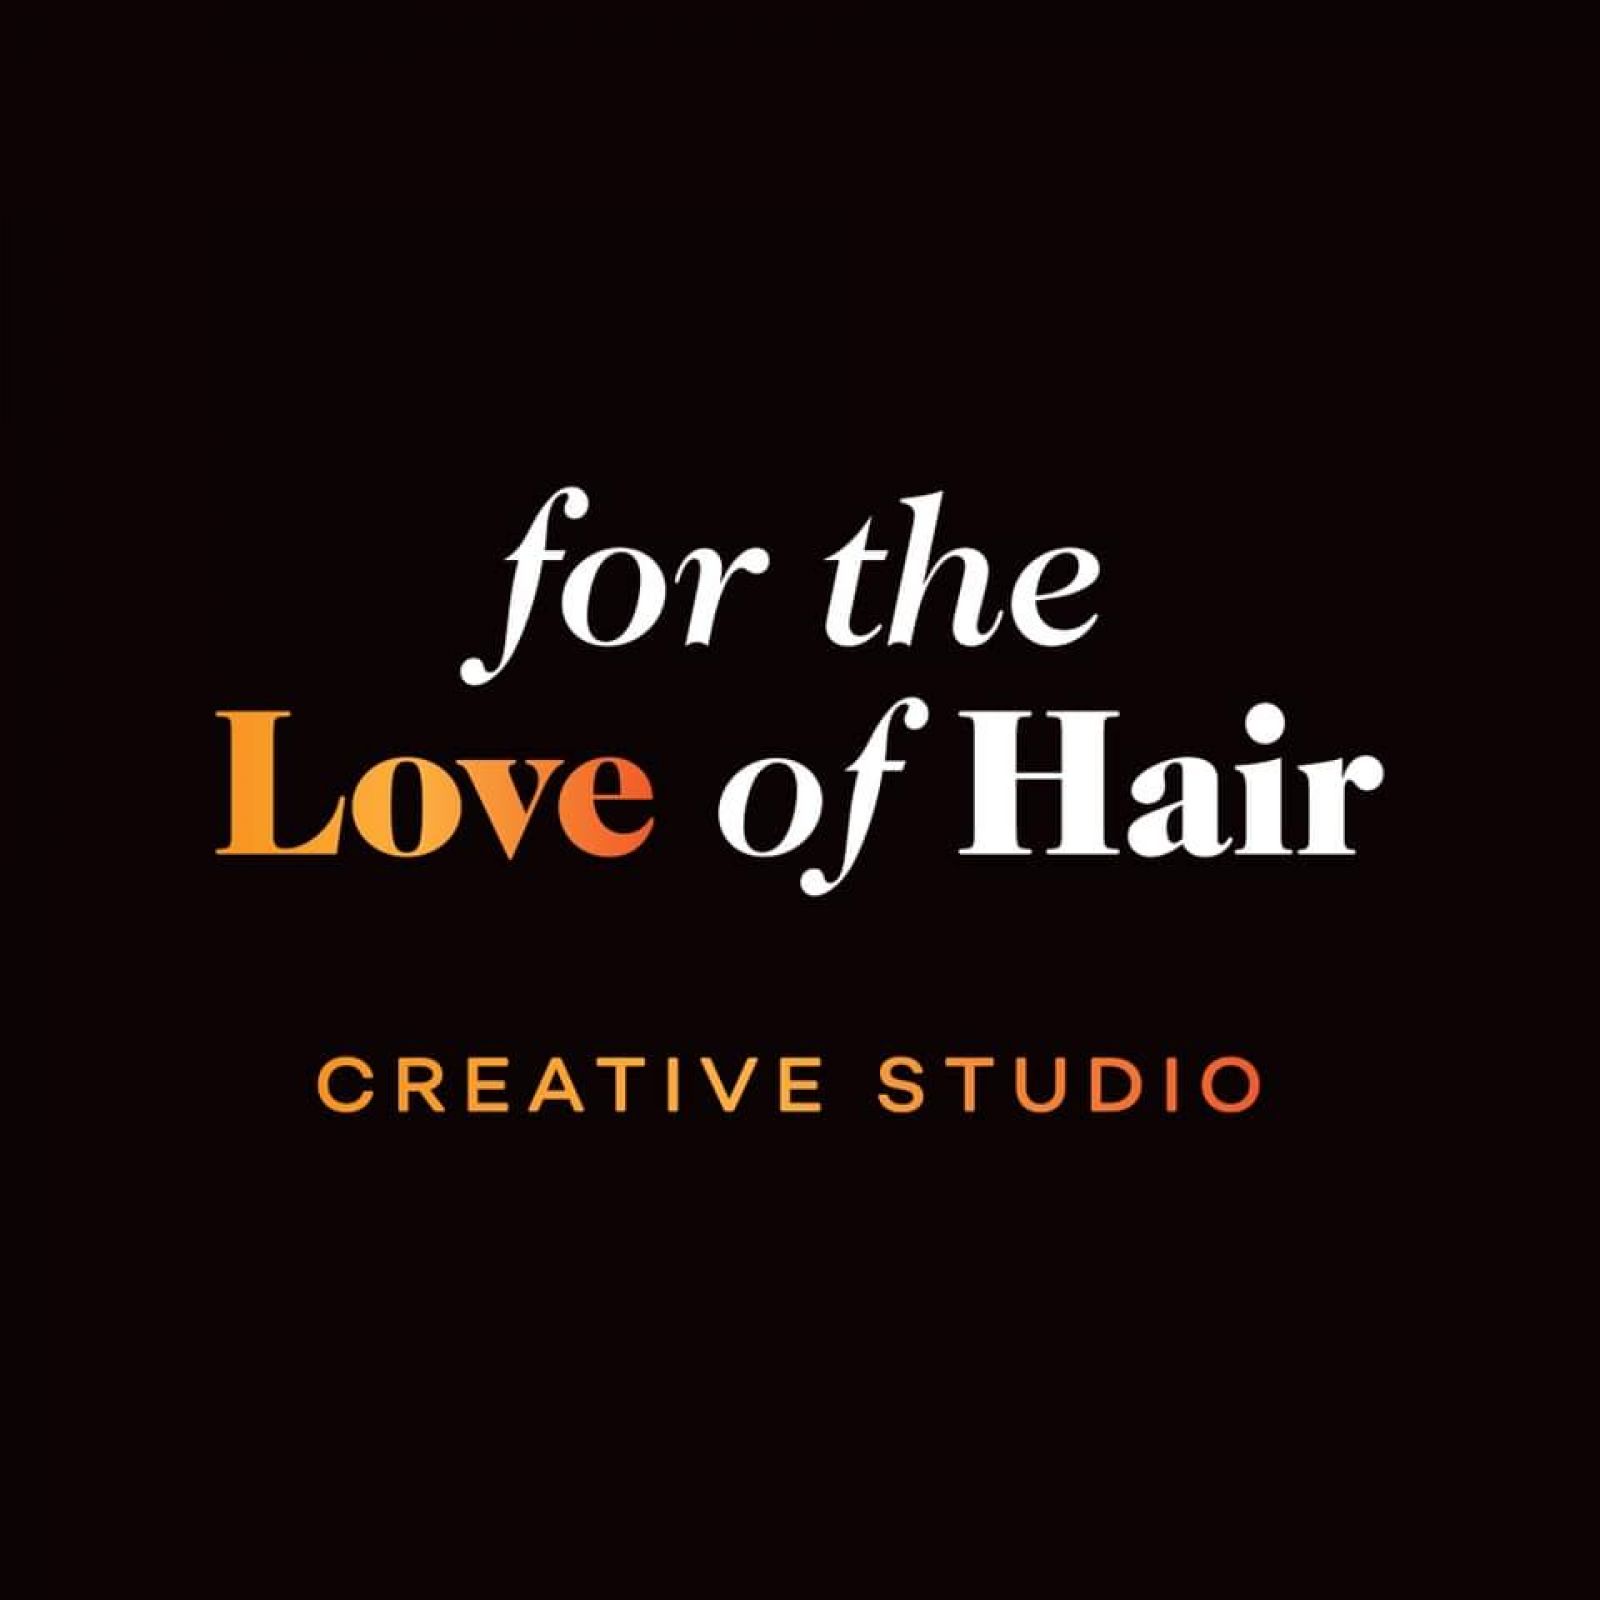 For the Love of Hair banner image